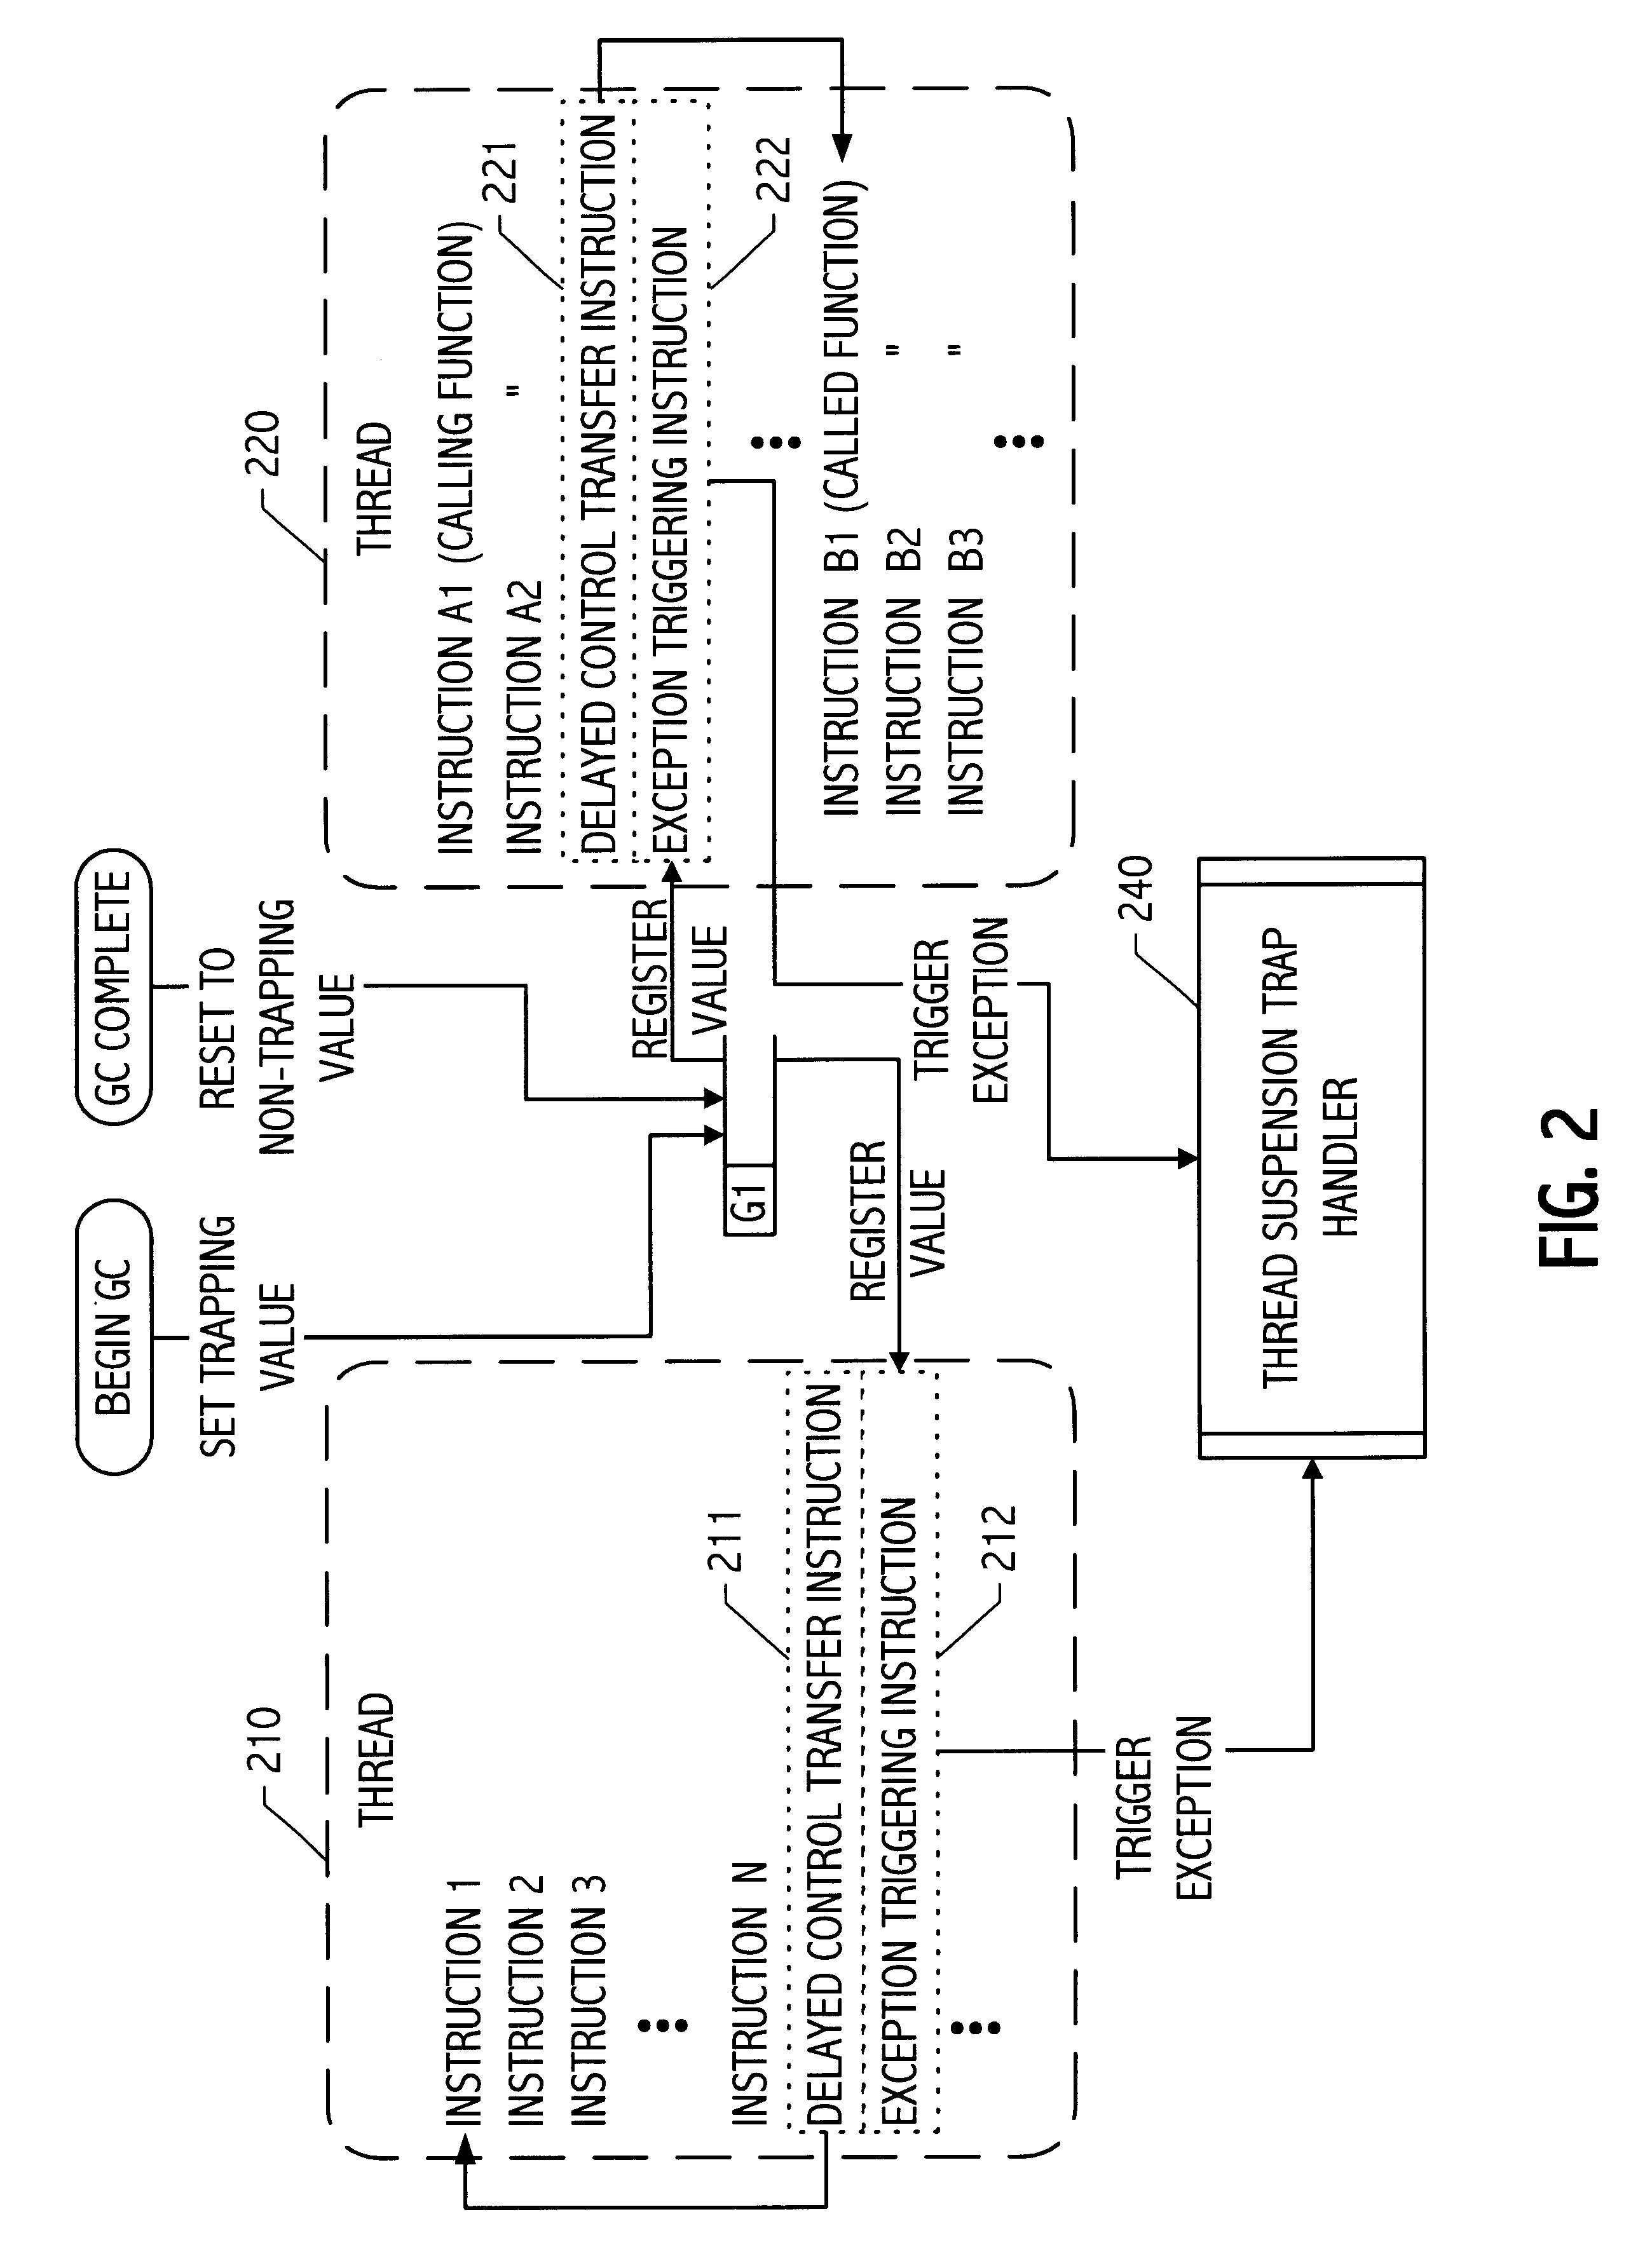 Thread suspension system and method using trapping instructions in delay slots